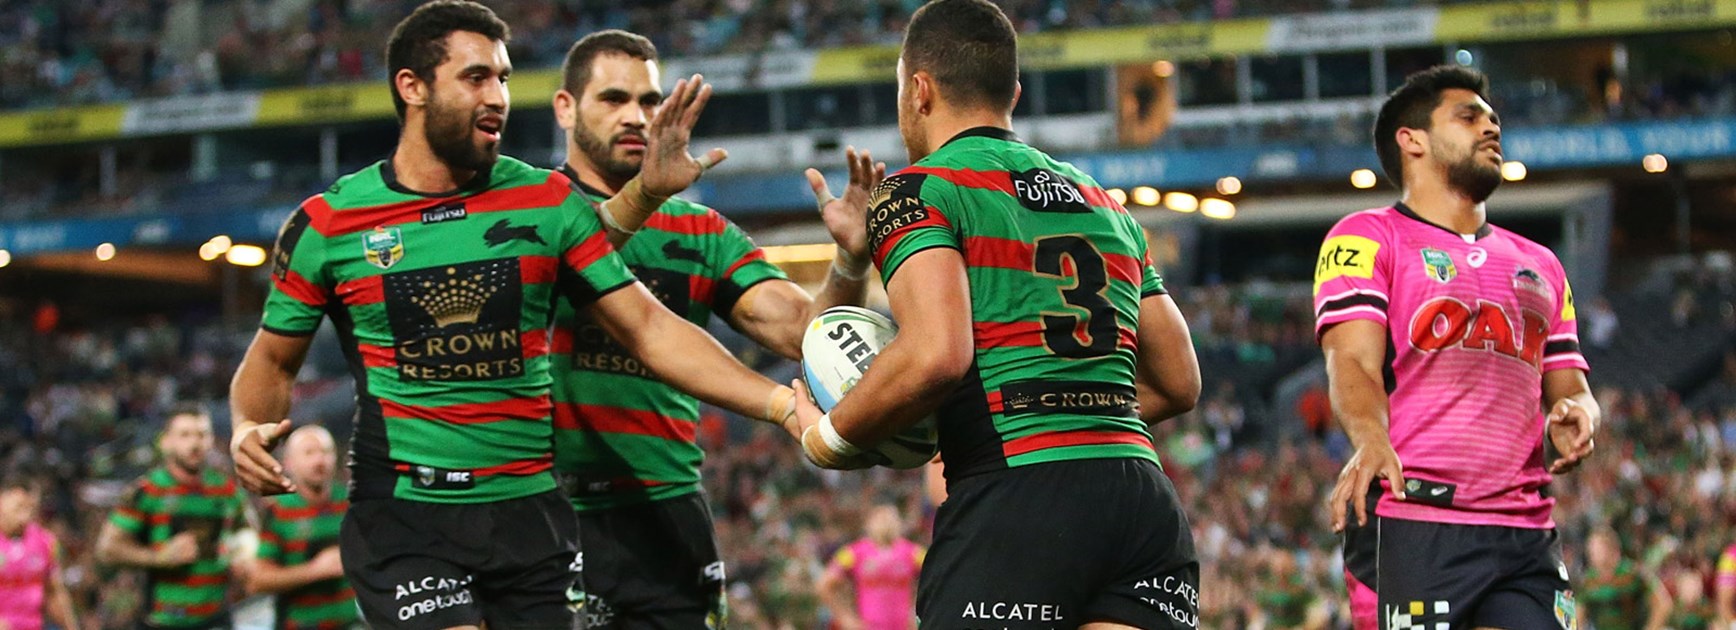 Souths players celebrate Dylan Walker's try against the Panthers in Round 21.